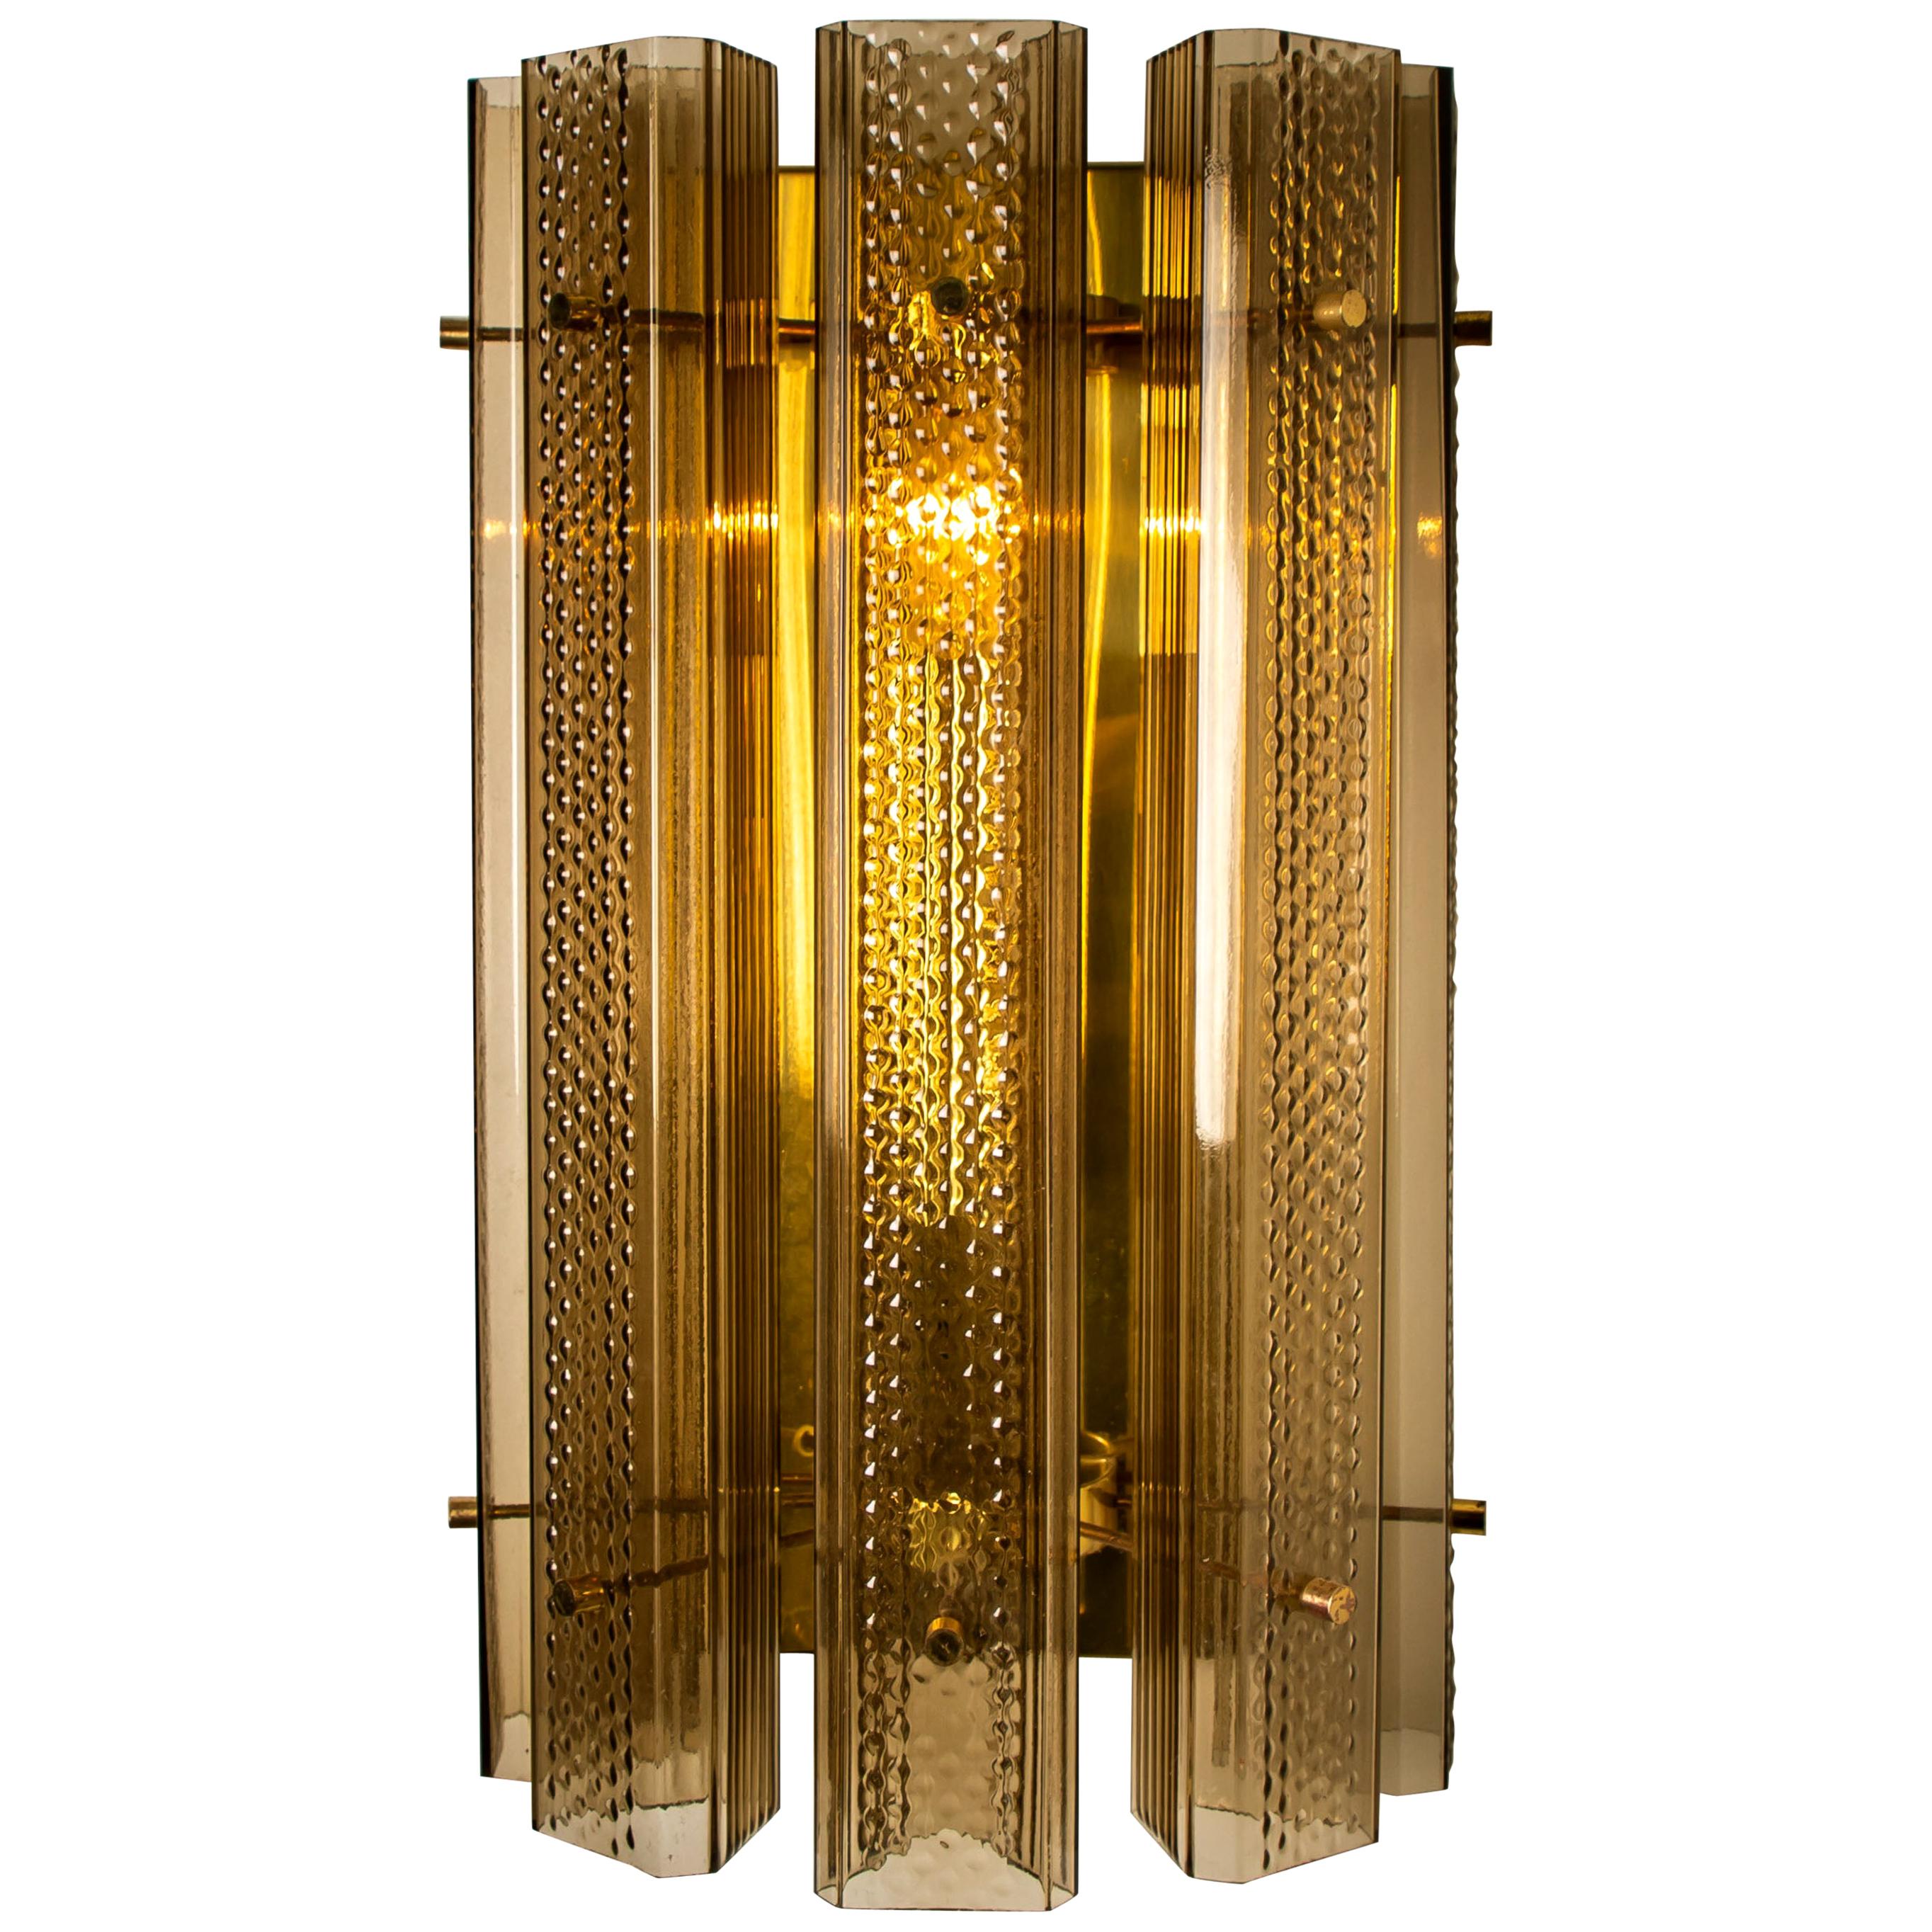 1 of the 3 pairs wonderful extra large Murano wall sconces, manufactured in the 1970s. The lights feature a brass frame with five large Murano square tubes in clear and smoked textured glass. With brass details. The tubes diffuse the light